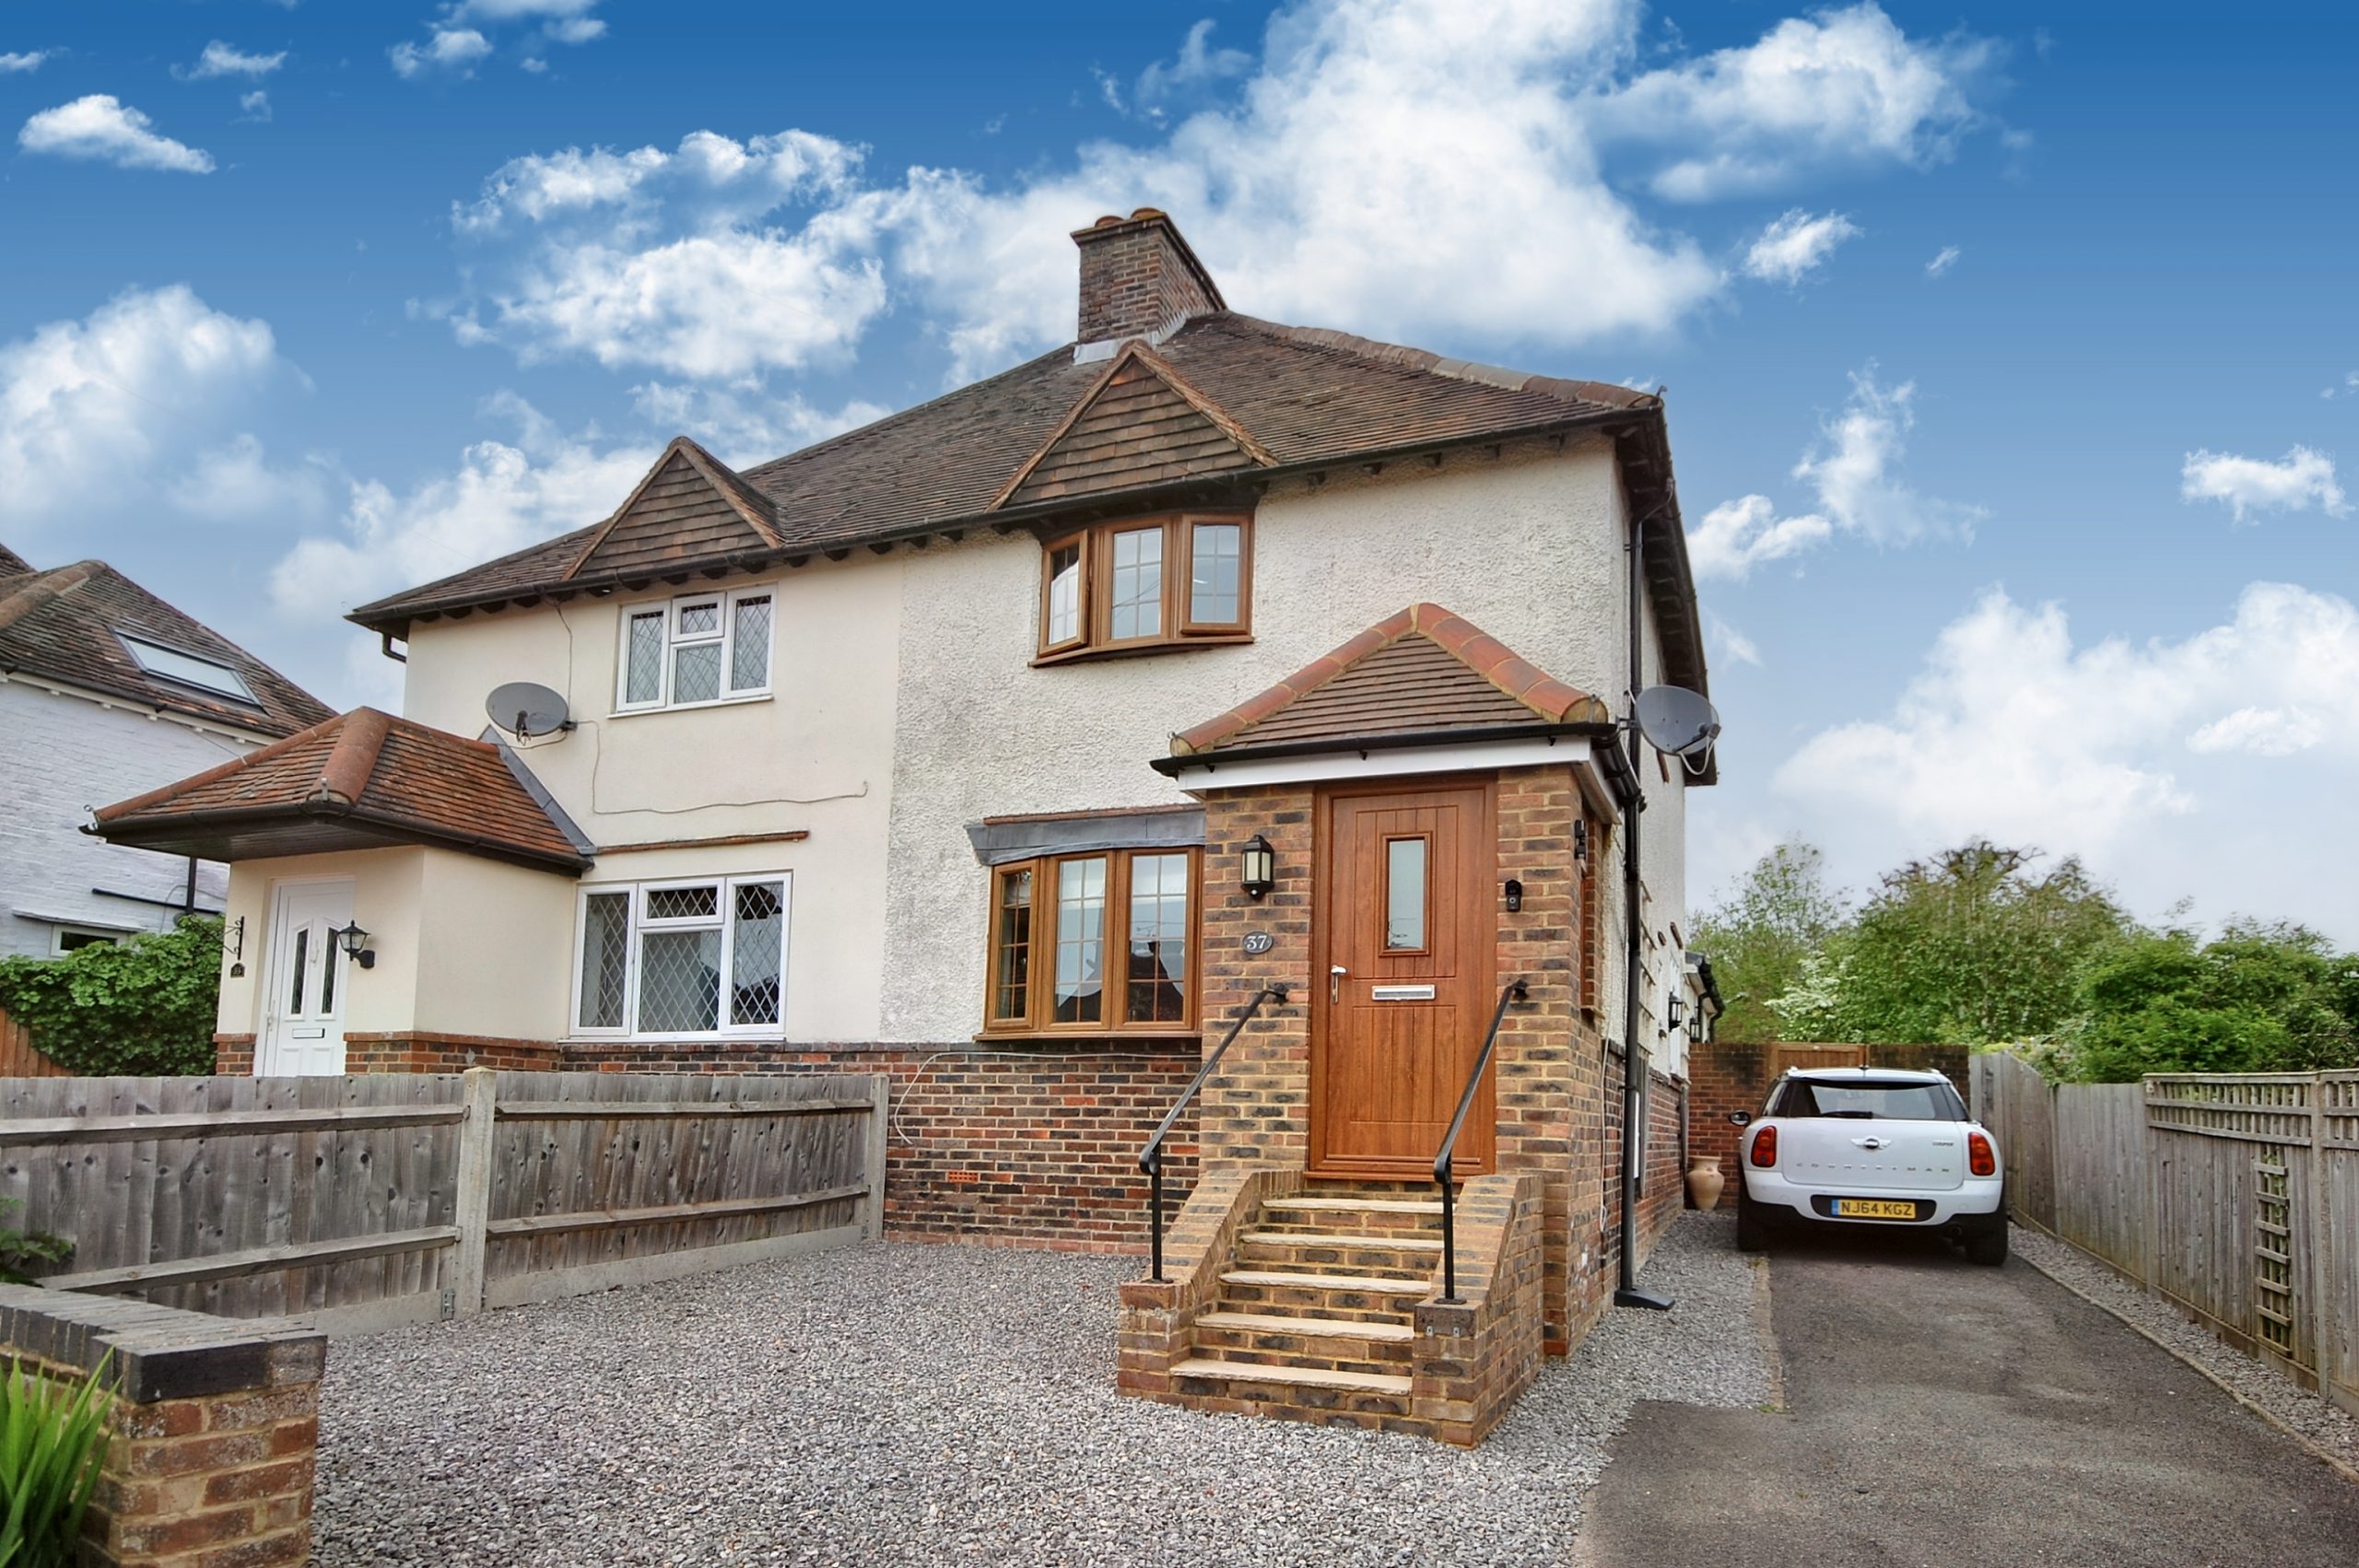 Churt, Farnham – 13 Viewings booked in 2 hours and calls still coming in! Guide £950,000